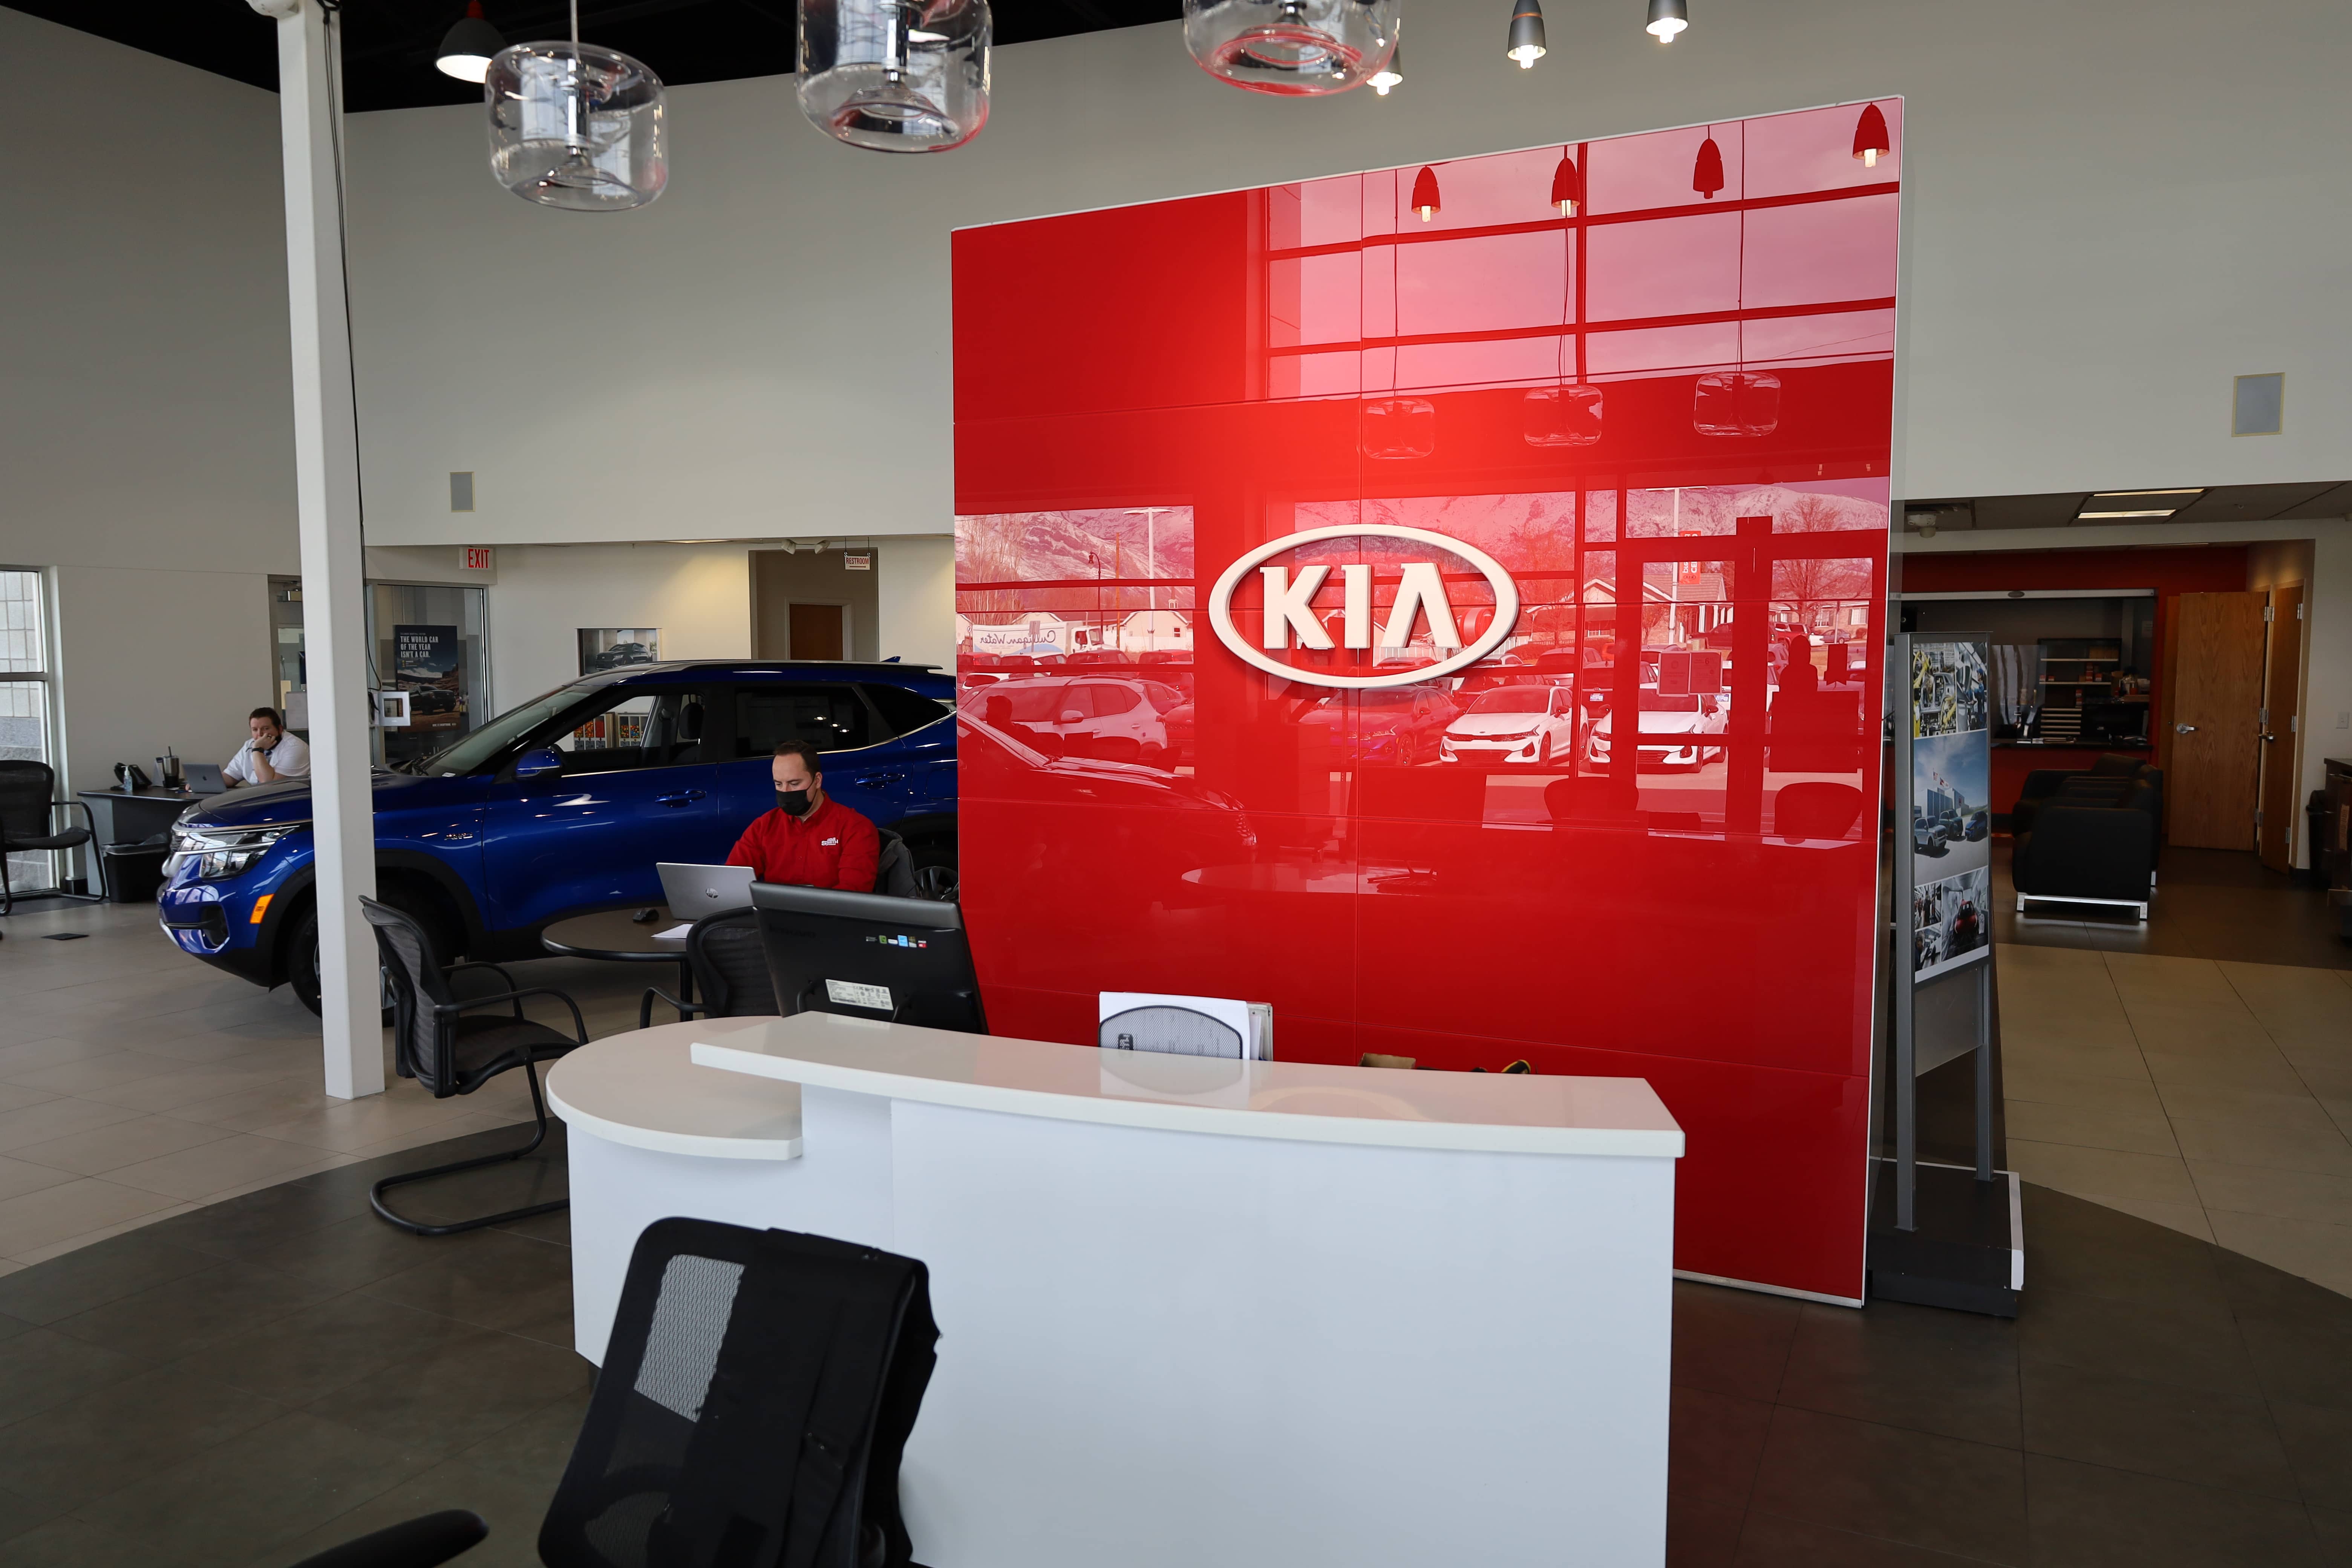 We have the best staff and customer service around. Come check out Doug Smith Kia in American Fork. We are willing to work with you!